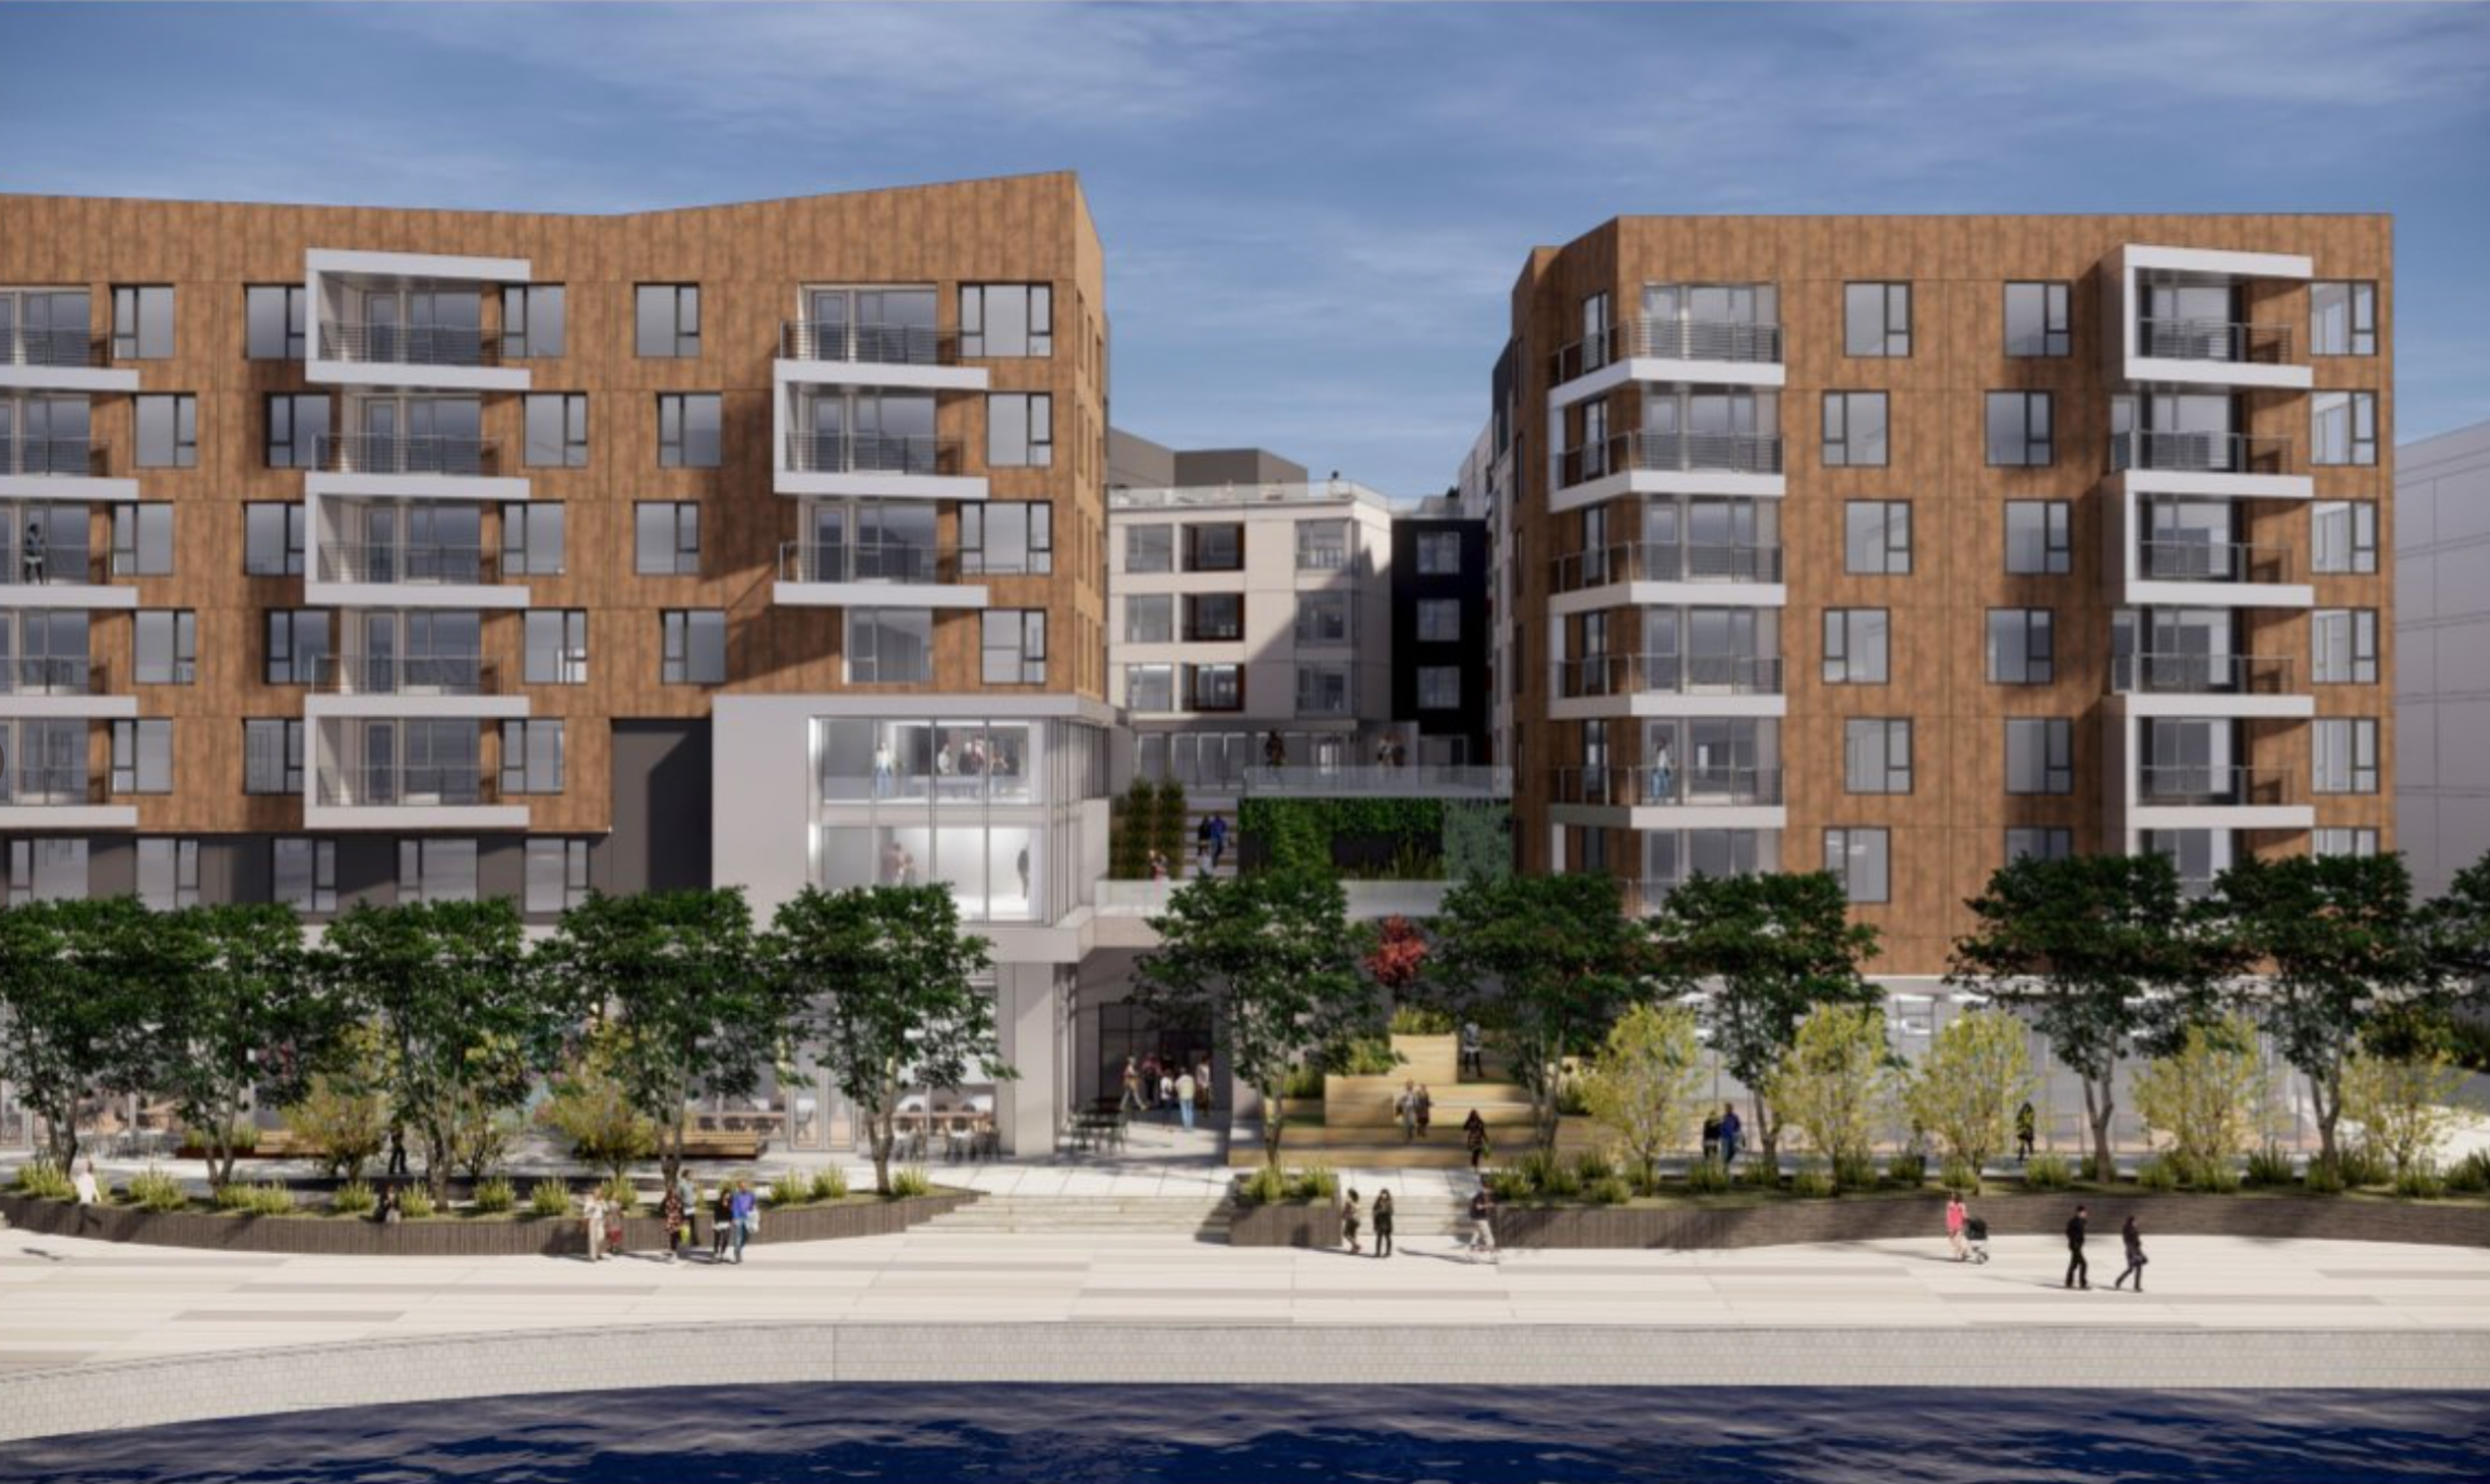 Brooklyn Basin Parcel H amenity space, rendering by TCA Architects